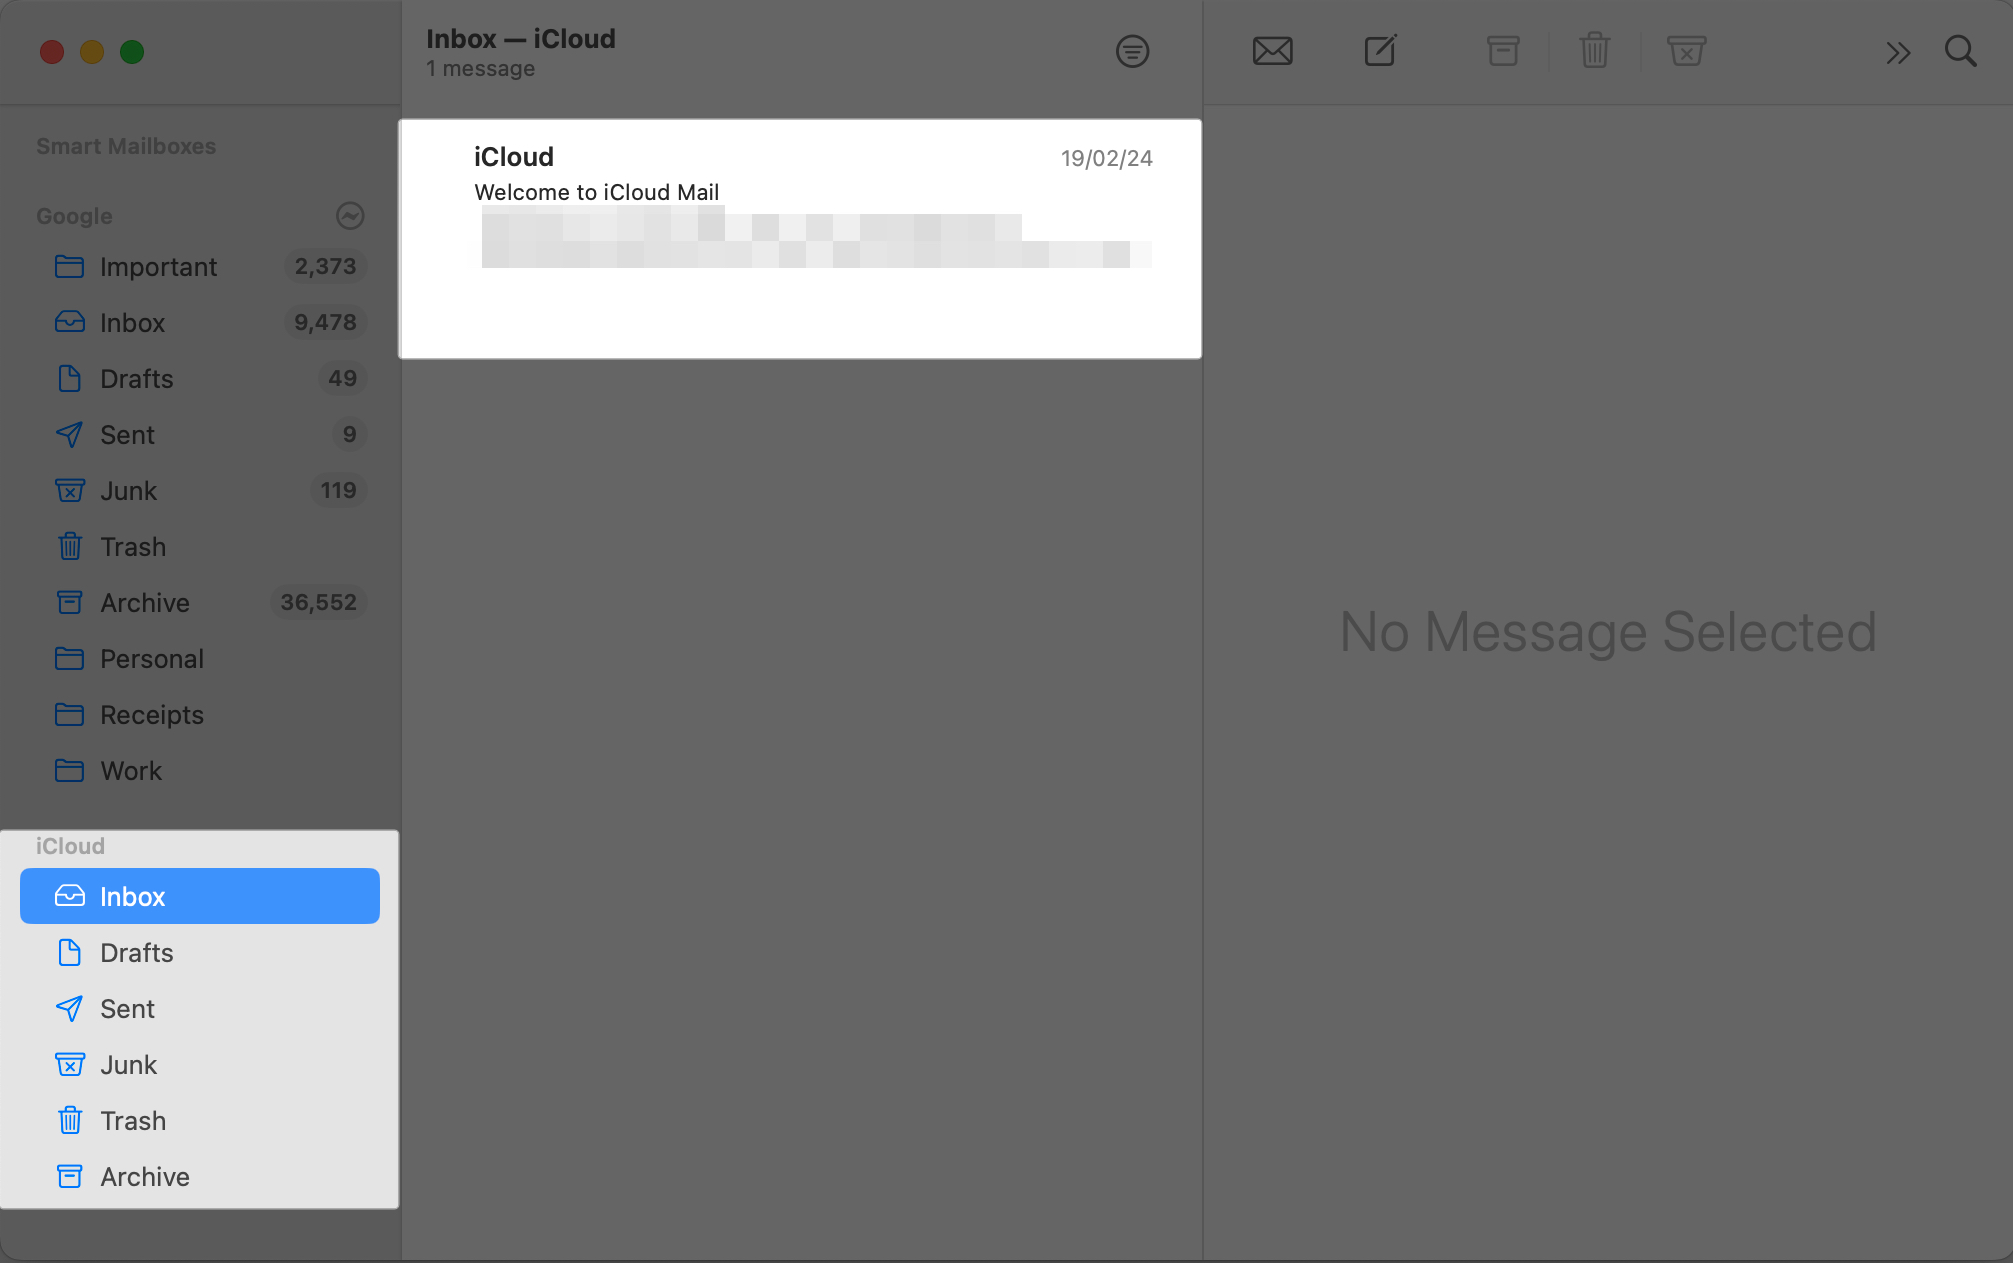 Launch the mail app on Mac, scroll down to iCloud on left pane